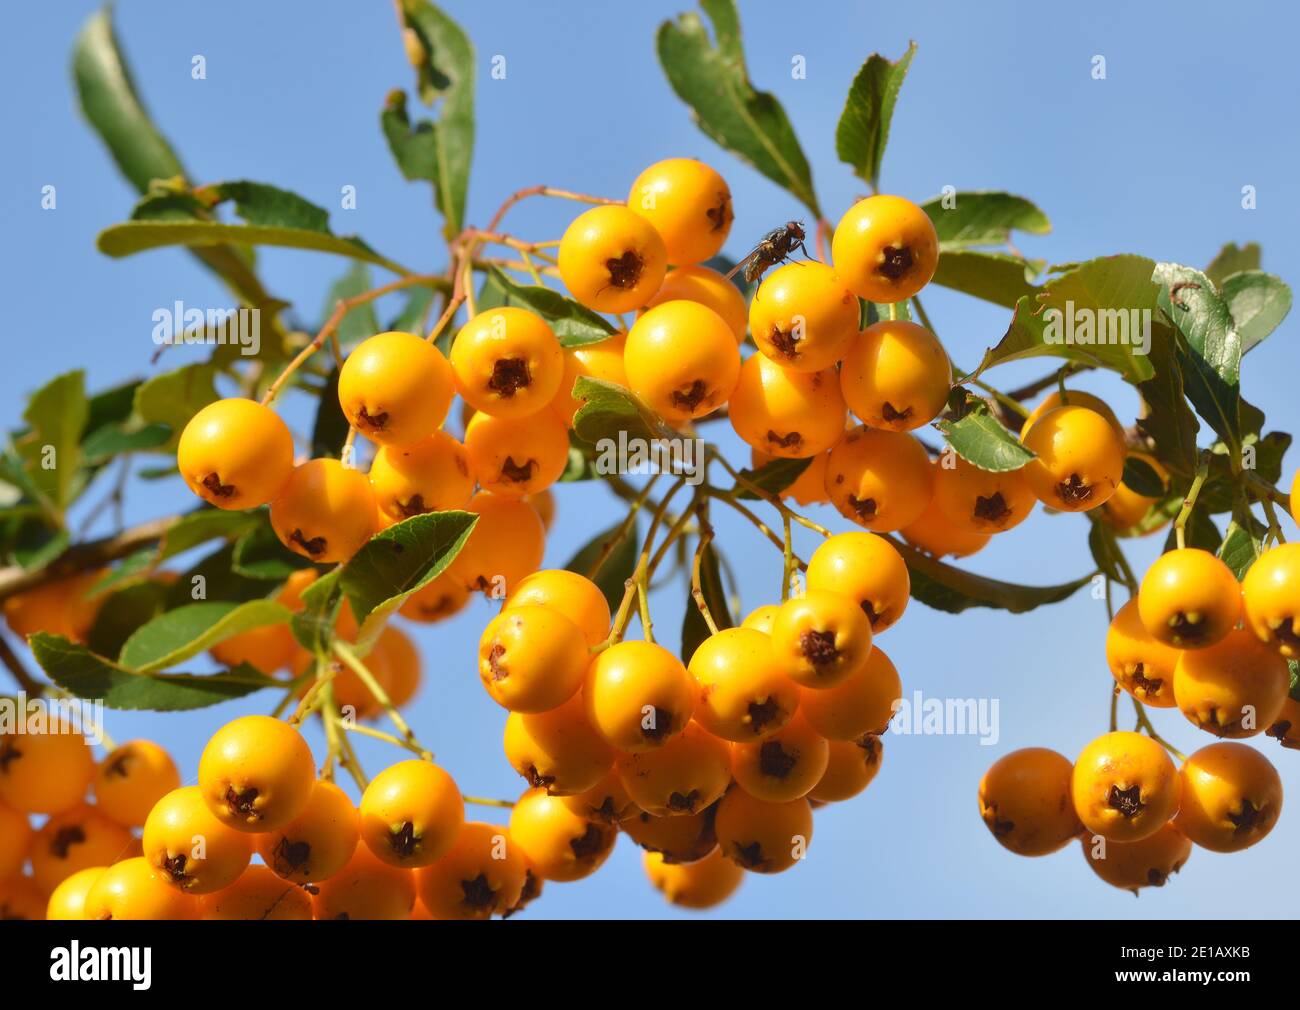 Seabuckthorn fruits and fly animal resting Stock Photo